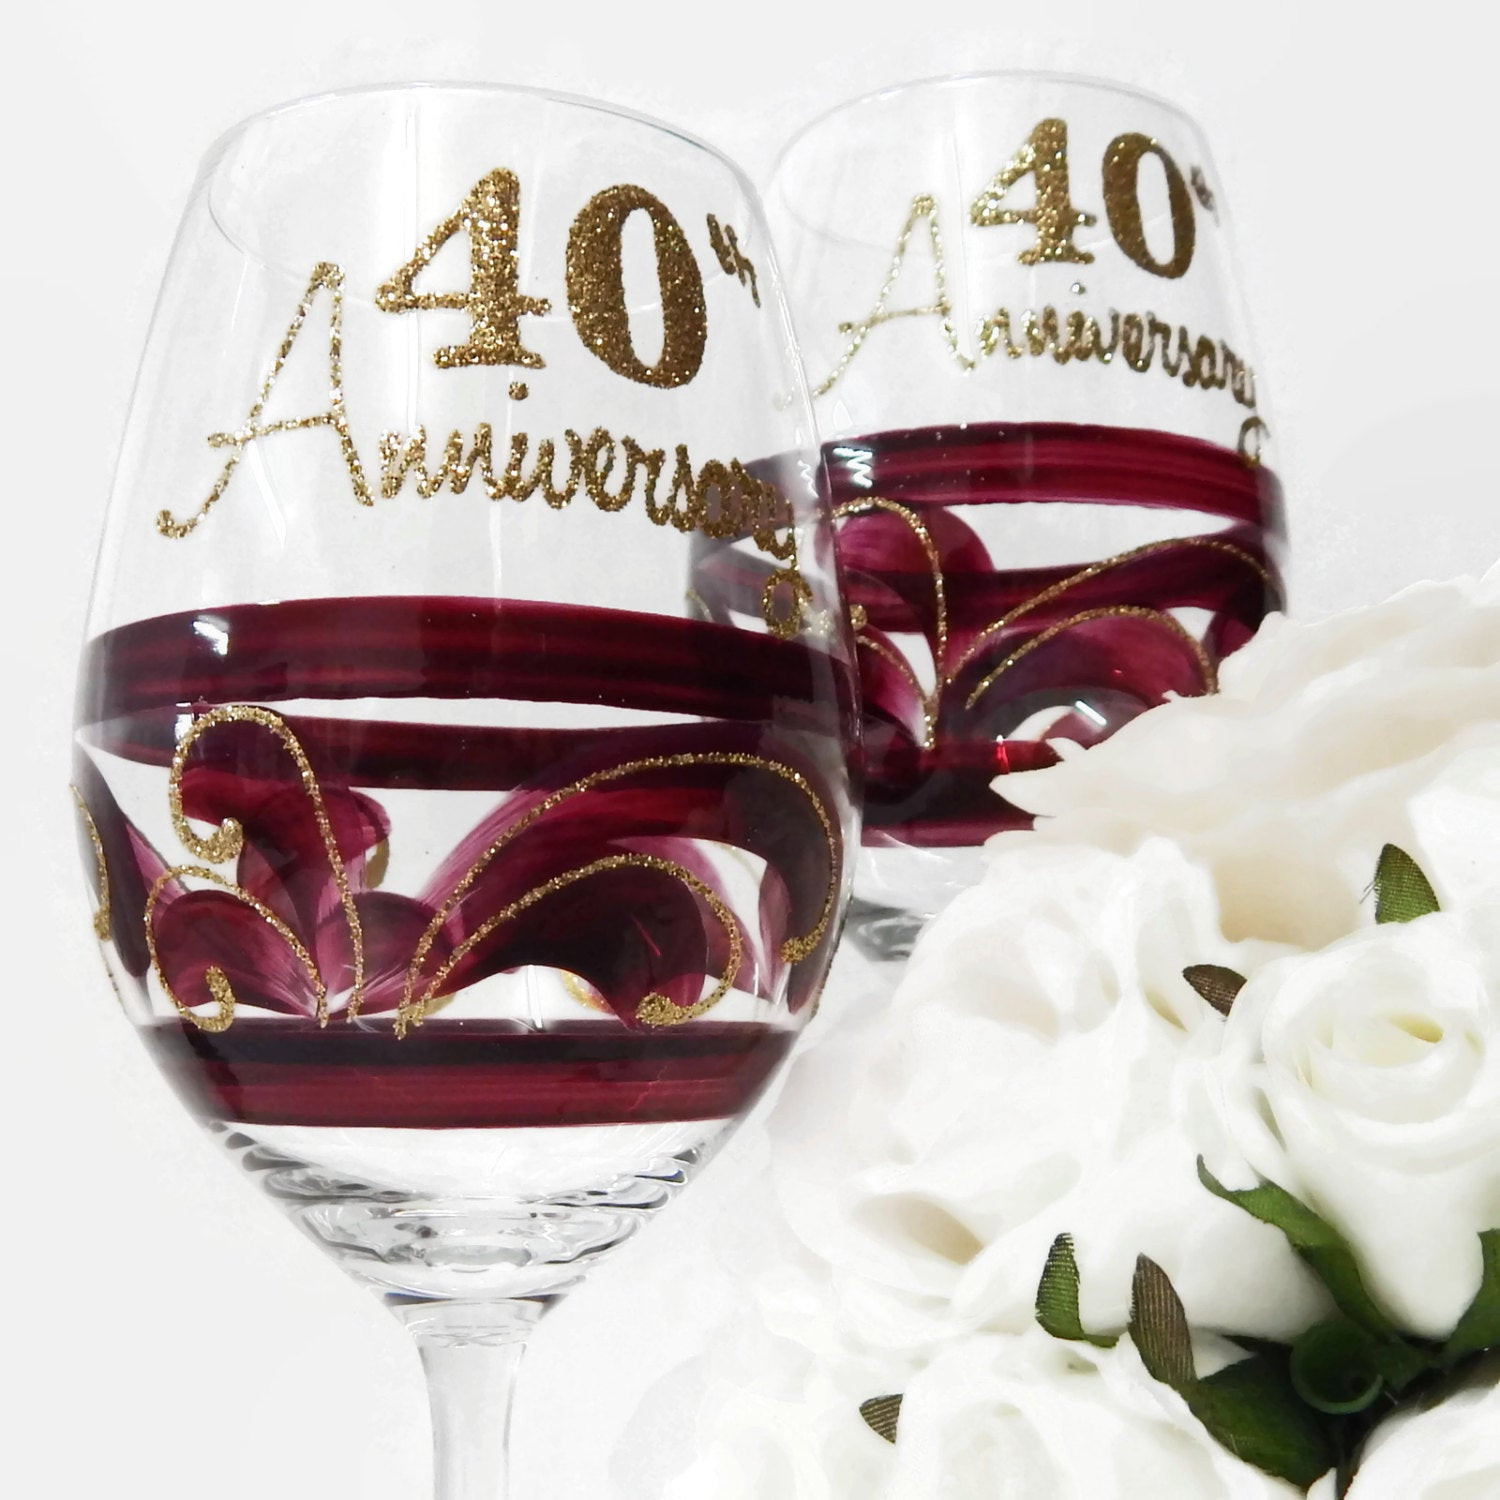 40th Wedding Anniversary Traditional Gift
 Sale 40th Wedding Anniversary Gift by InaSpinNiquesWay